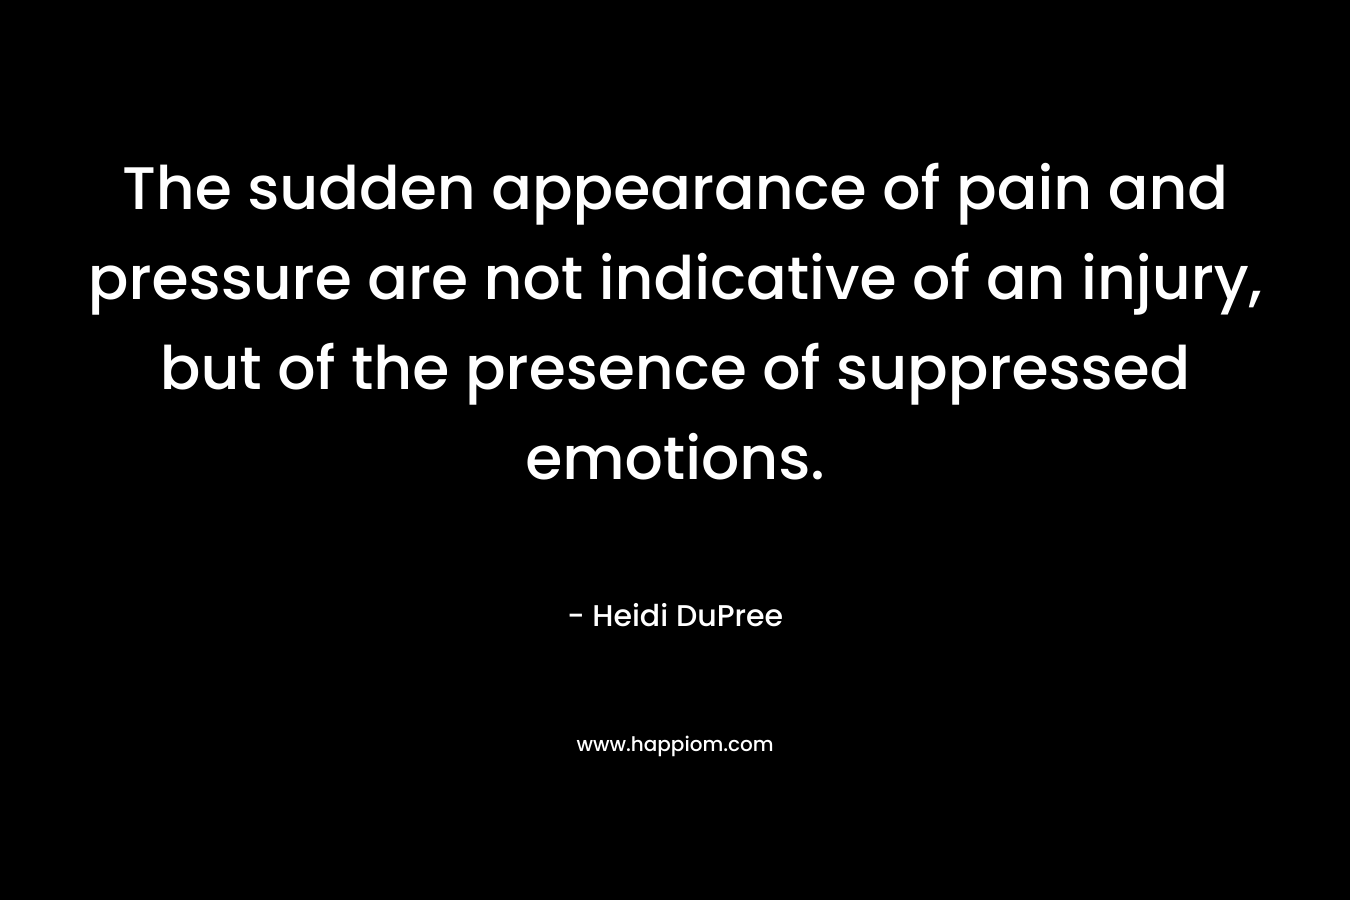 The sudden appearance of pain and pressure are not indicative of an injury, but of the presence of suppressed emotions. – Heidi DuPree